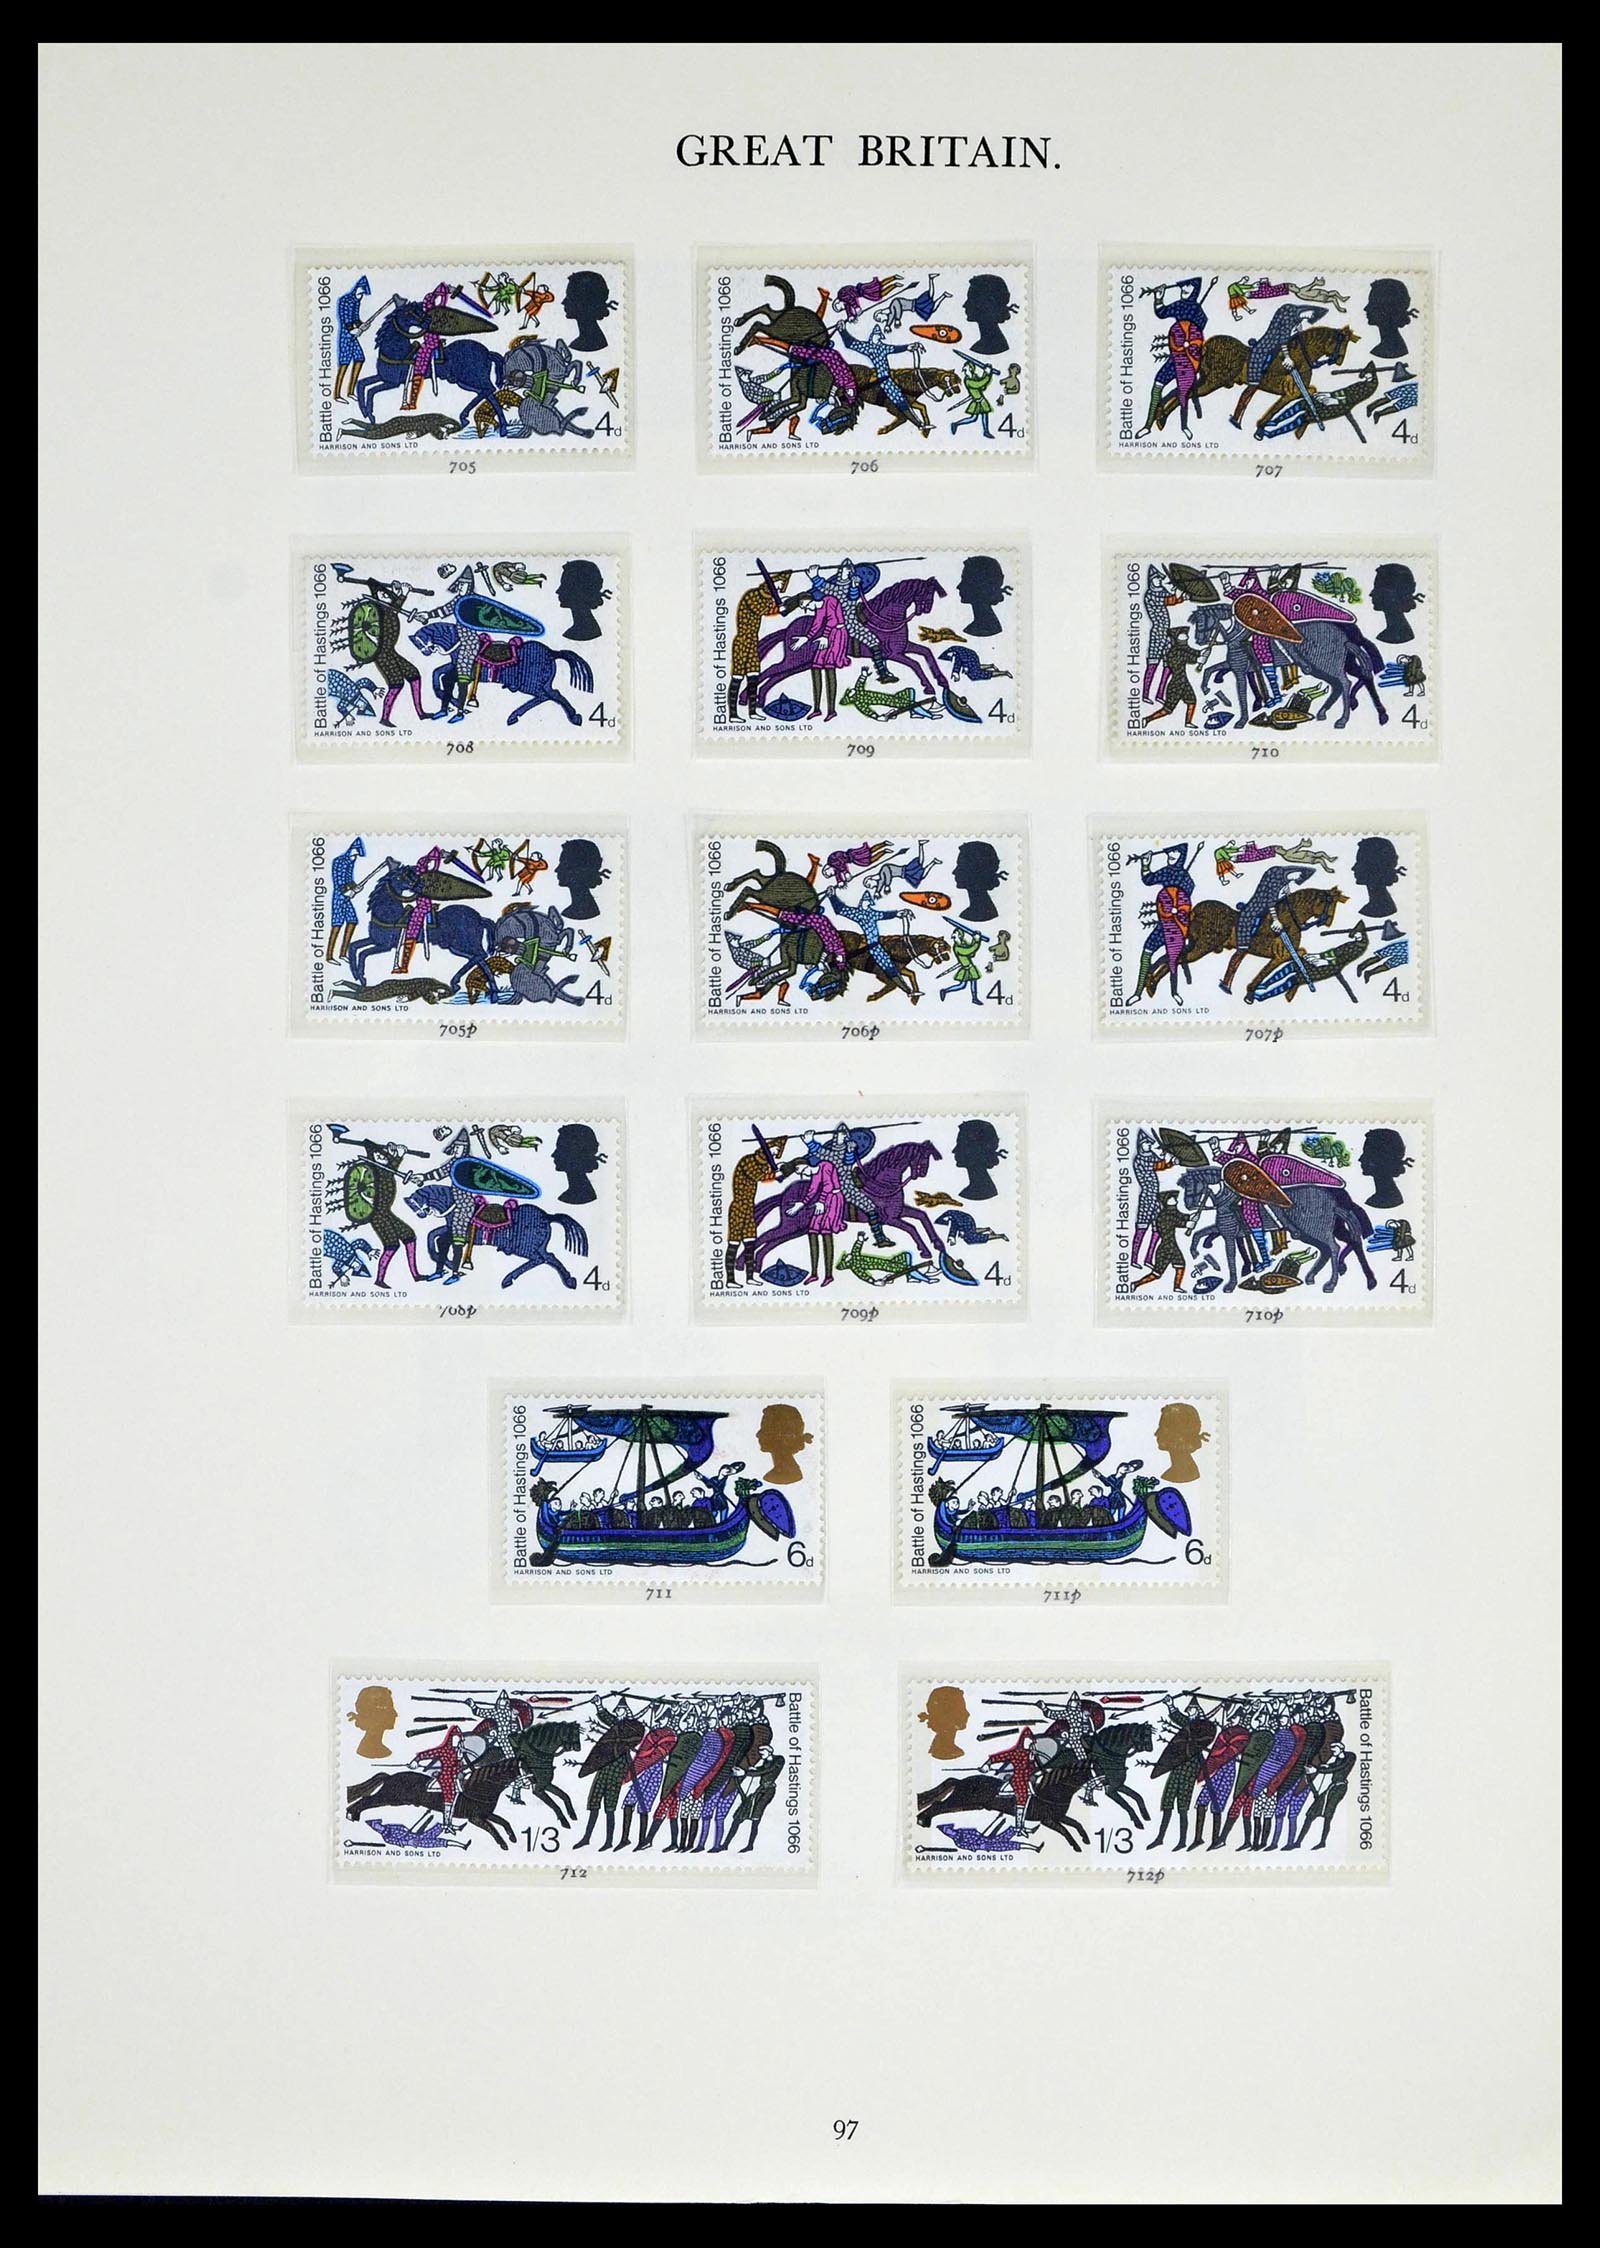 39025 0045 - Stamp collection 39025 Great Britain specialised 1840-1990.